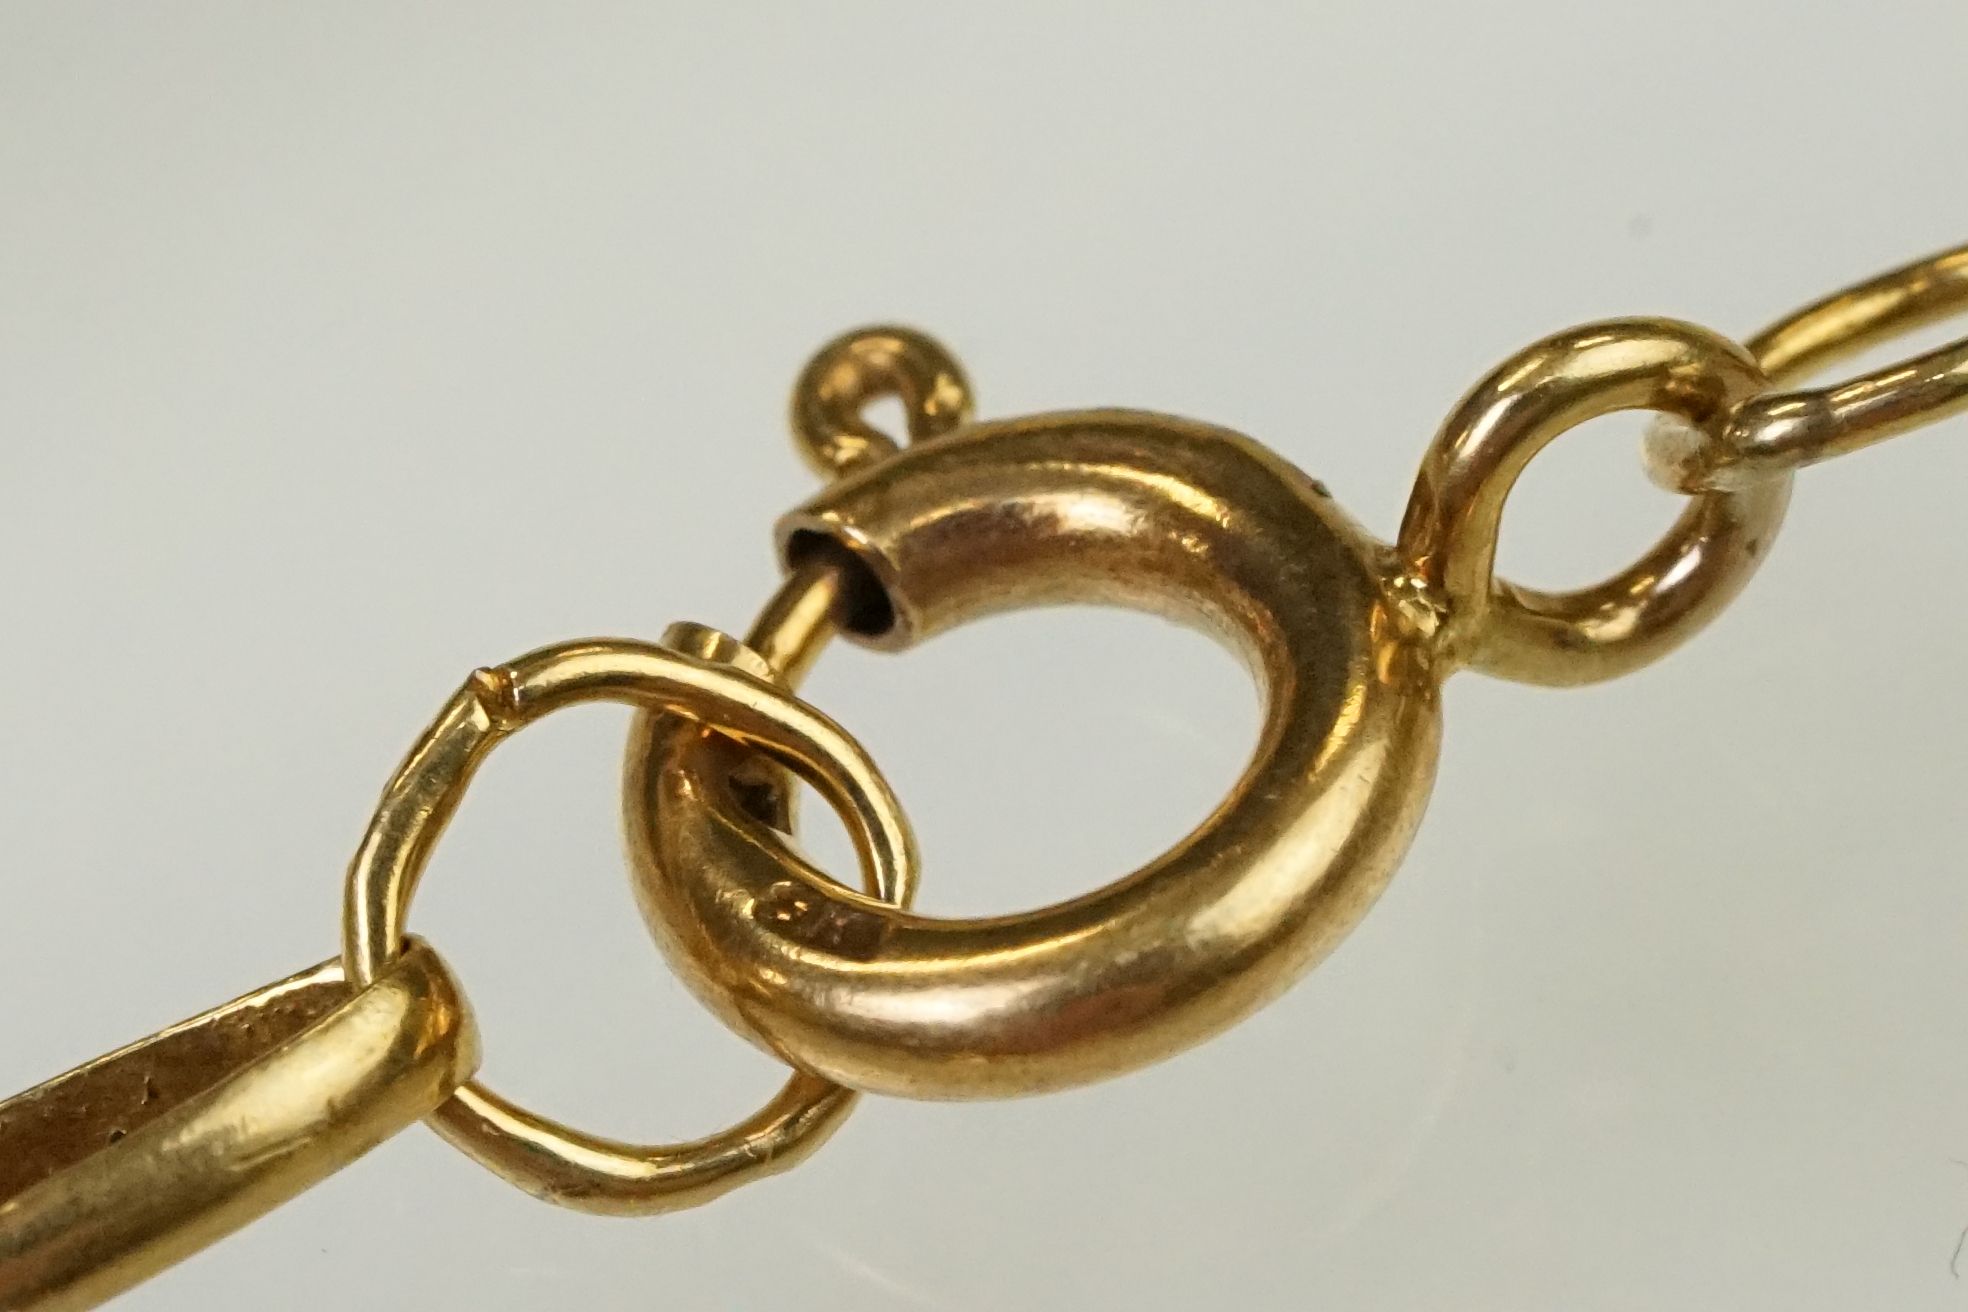 9ct gold oval link necklace chain with spring ring clasp. Marked 9k to clasp. Measures 80cm. - Image 4 of 5